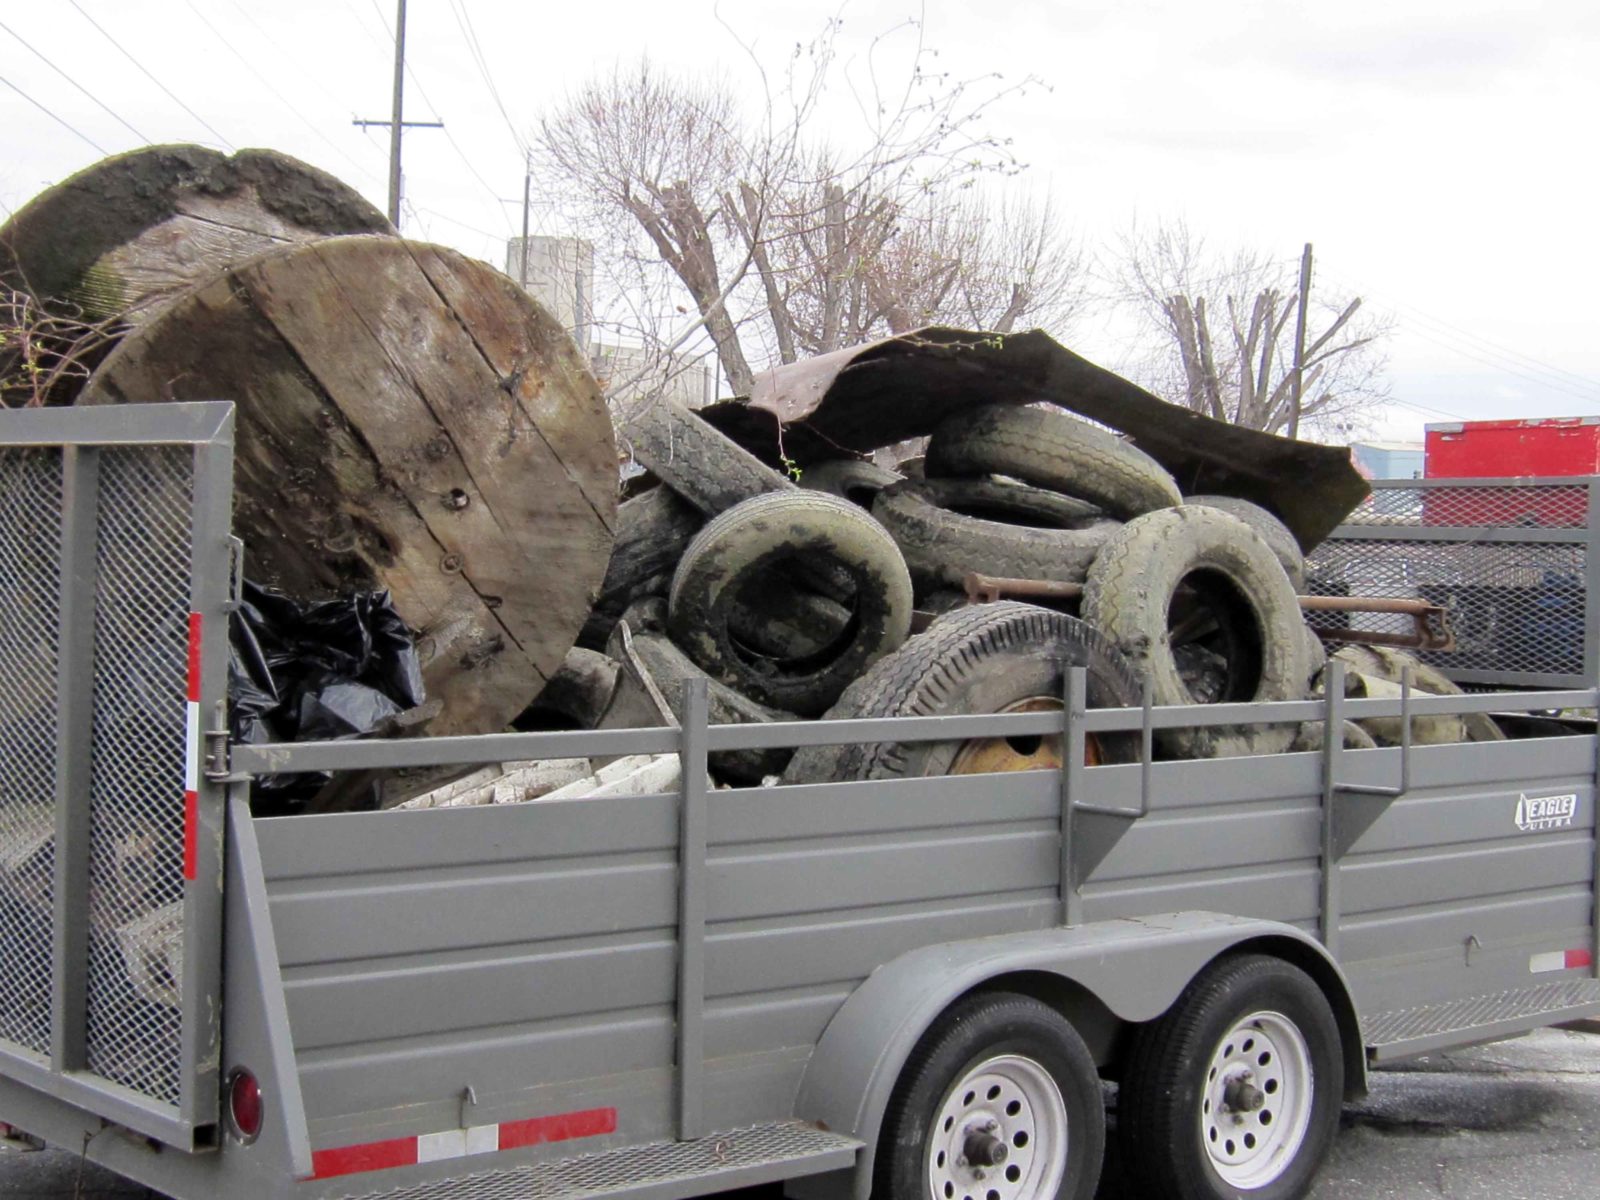 Piles of debris from the clean-up work loaded in a trailer.